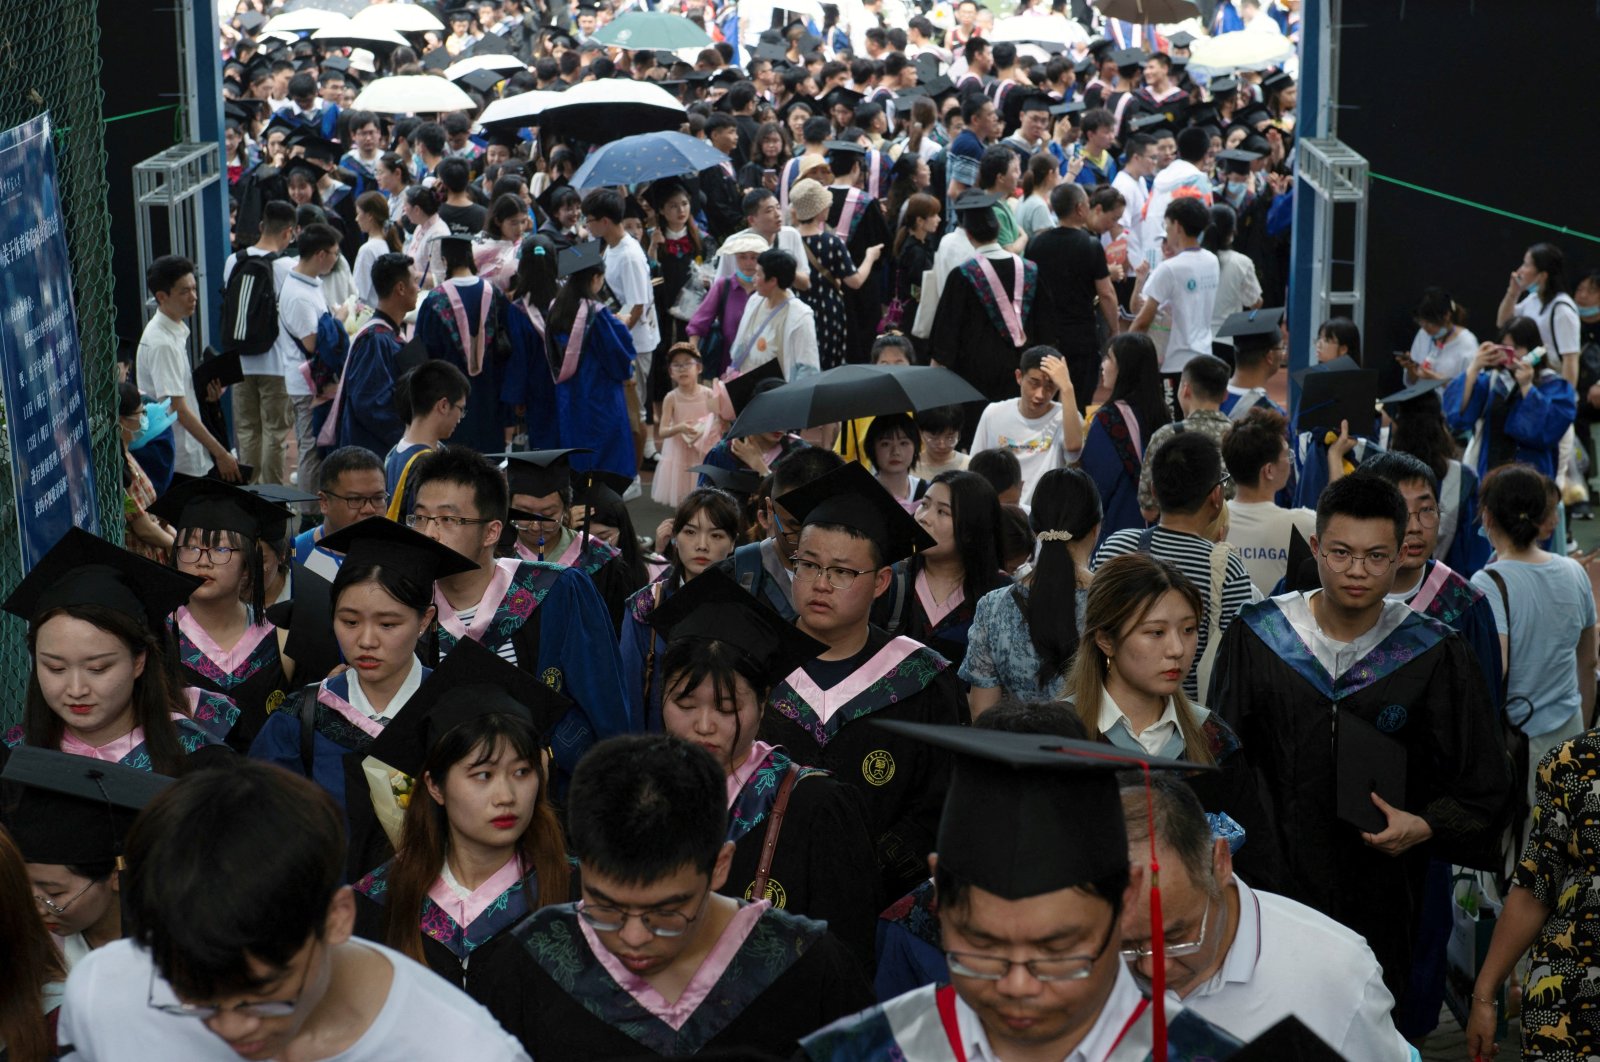 Graduates, including students who could not attend last year due to the coronavirus pandemic, attend a graduation ceremony at Central China Normal University in Wuhan, Hubei province, China, June 13, 2021. (Reuters Photo)